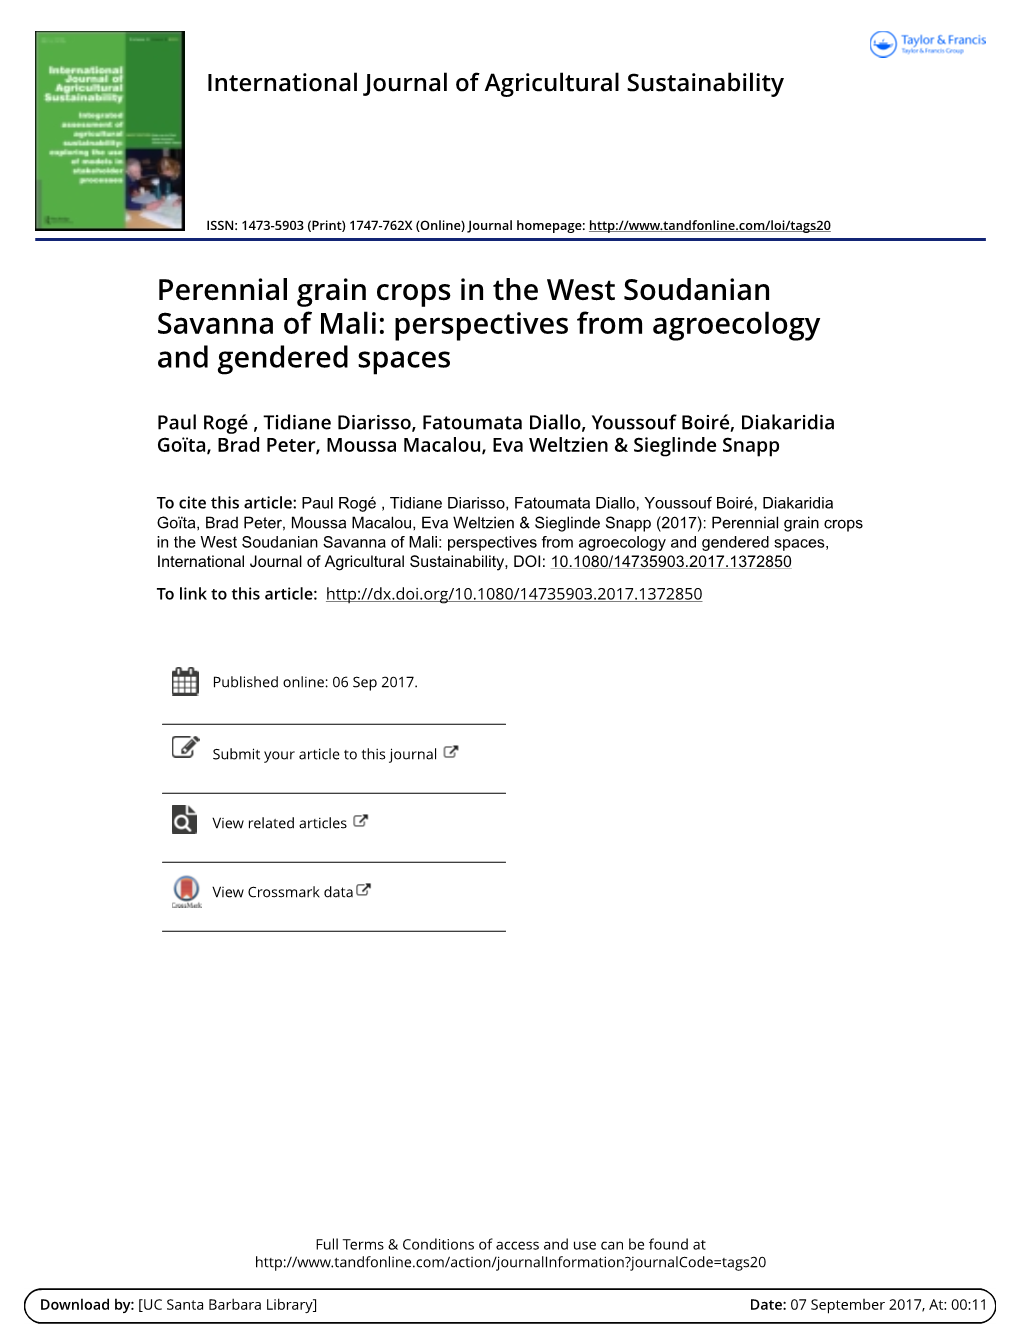 Perennial Grain Crops in the West Soudanian Savanna of Mali: Perspectives from Agroecology and Gendered Spaces